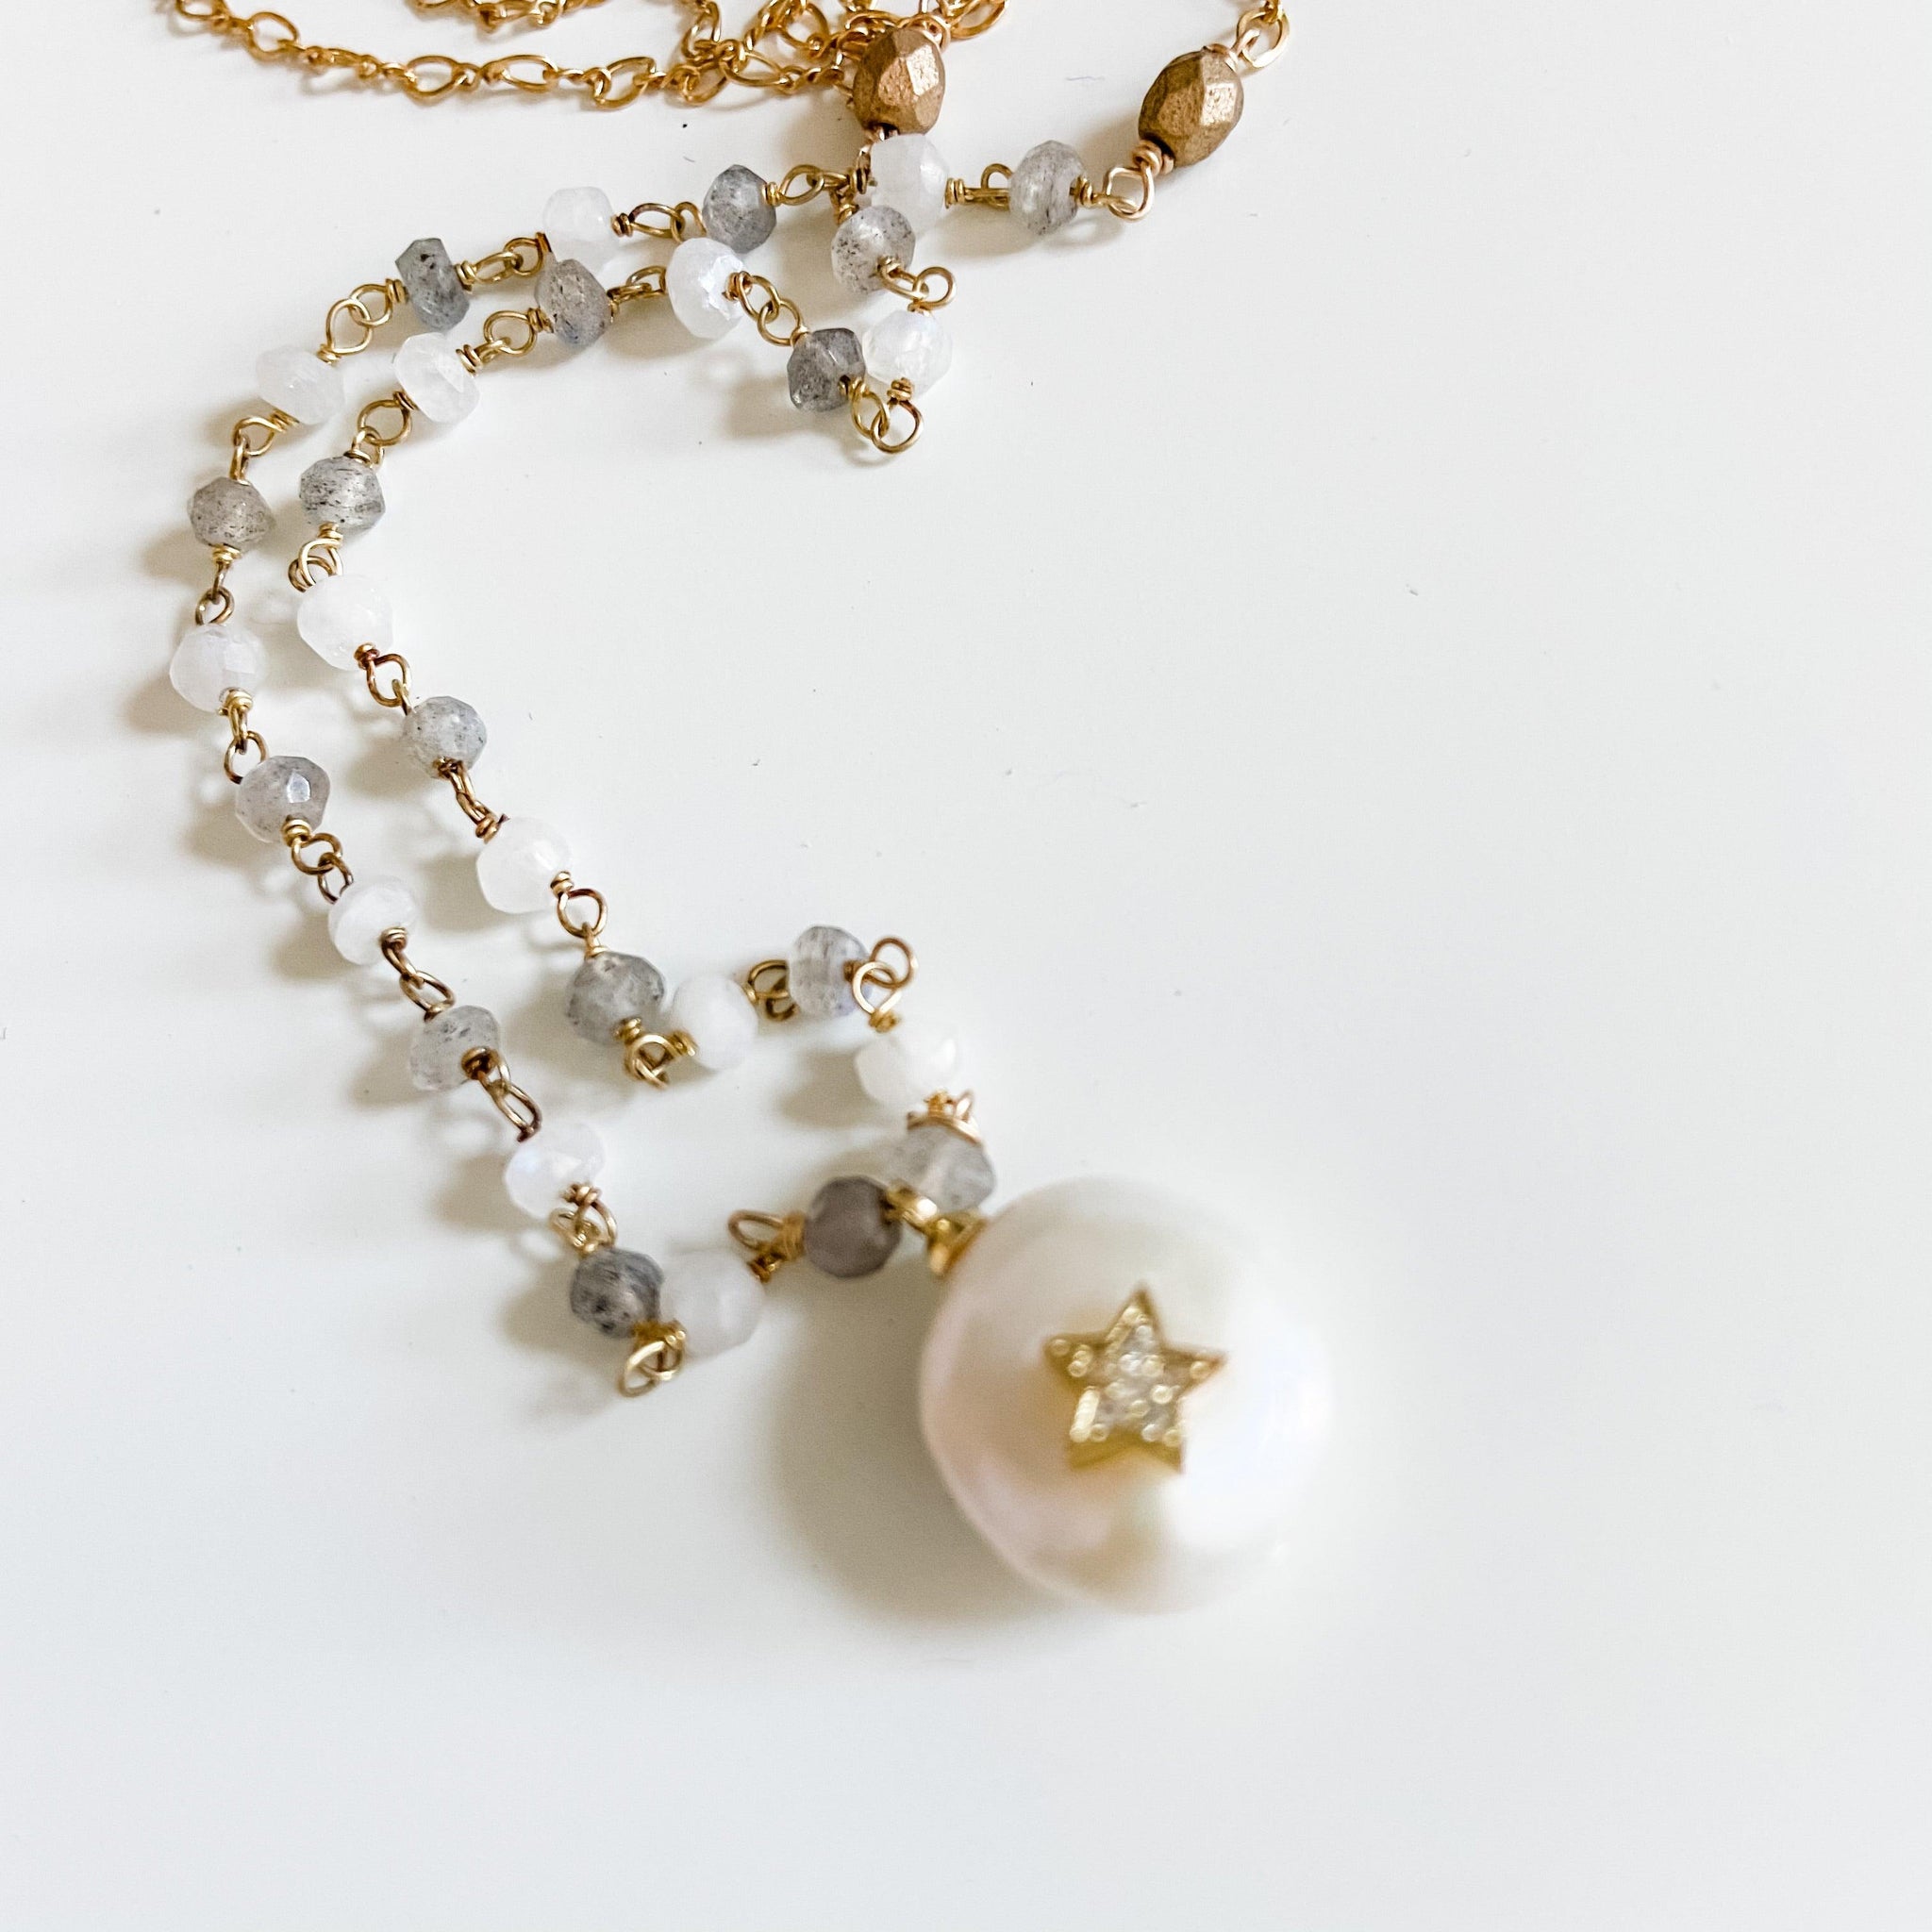 Pearl, Moonstone and Labradorite with 14K Gold Filled Necklace Uni-T Necklace